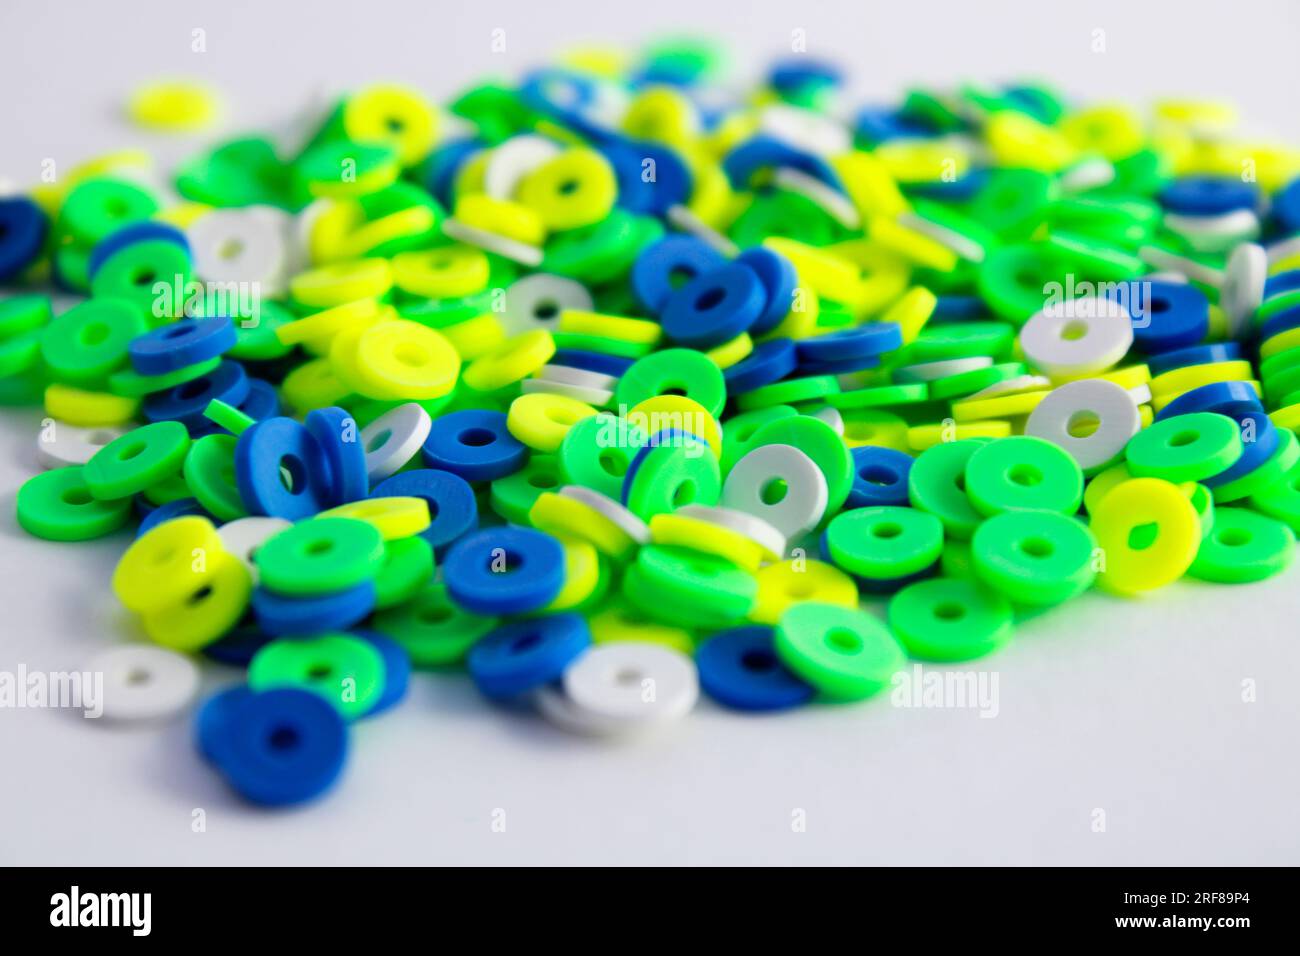 Glass and clay beads of different shapes and colors displayed in bulk at  local fair Stock Photo - Alamy